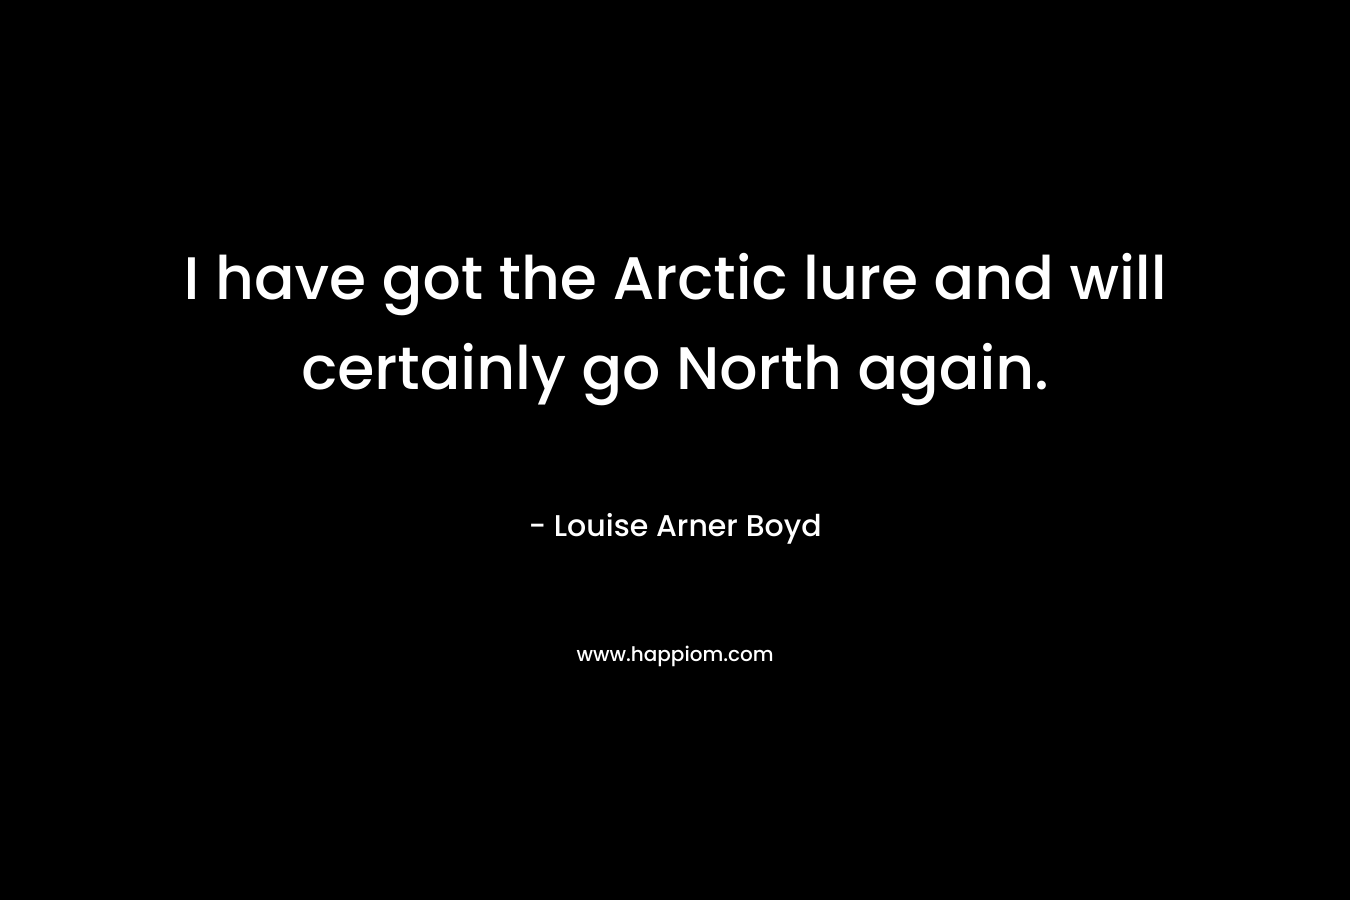 I have got the Arctic lure and will certainly go North again.